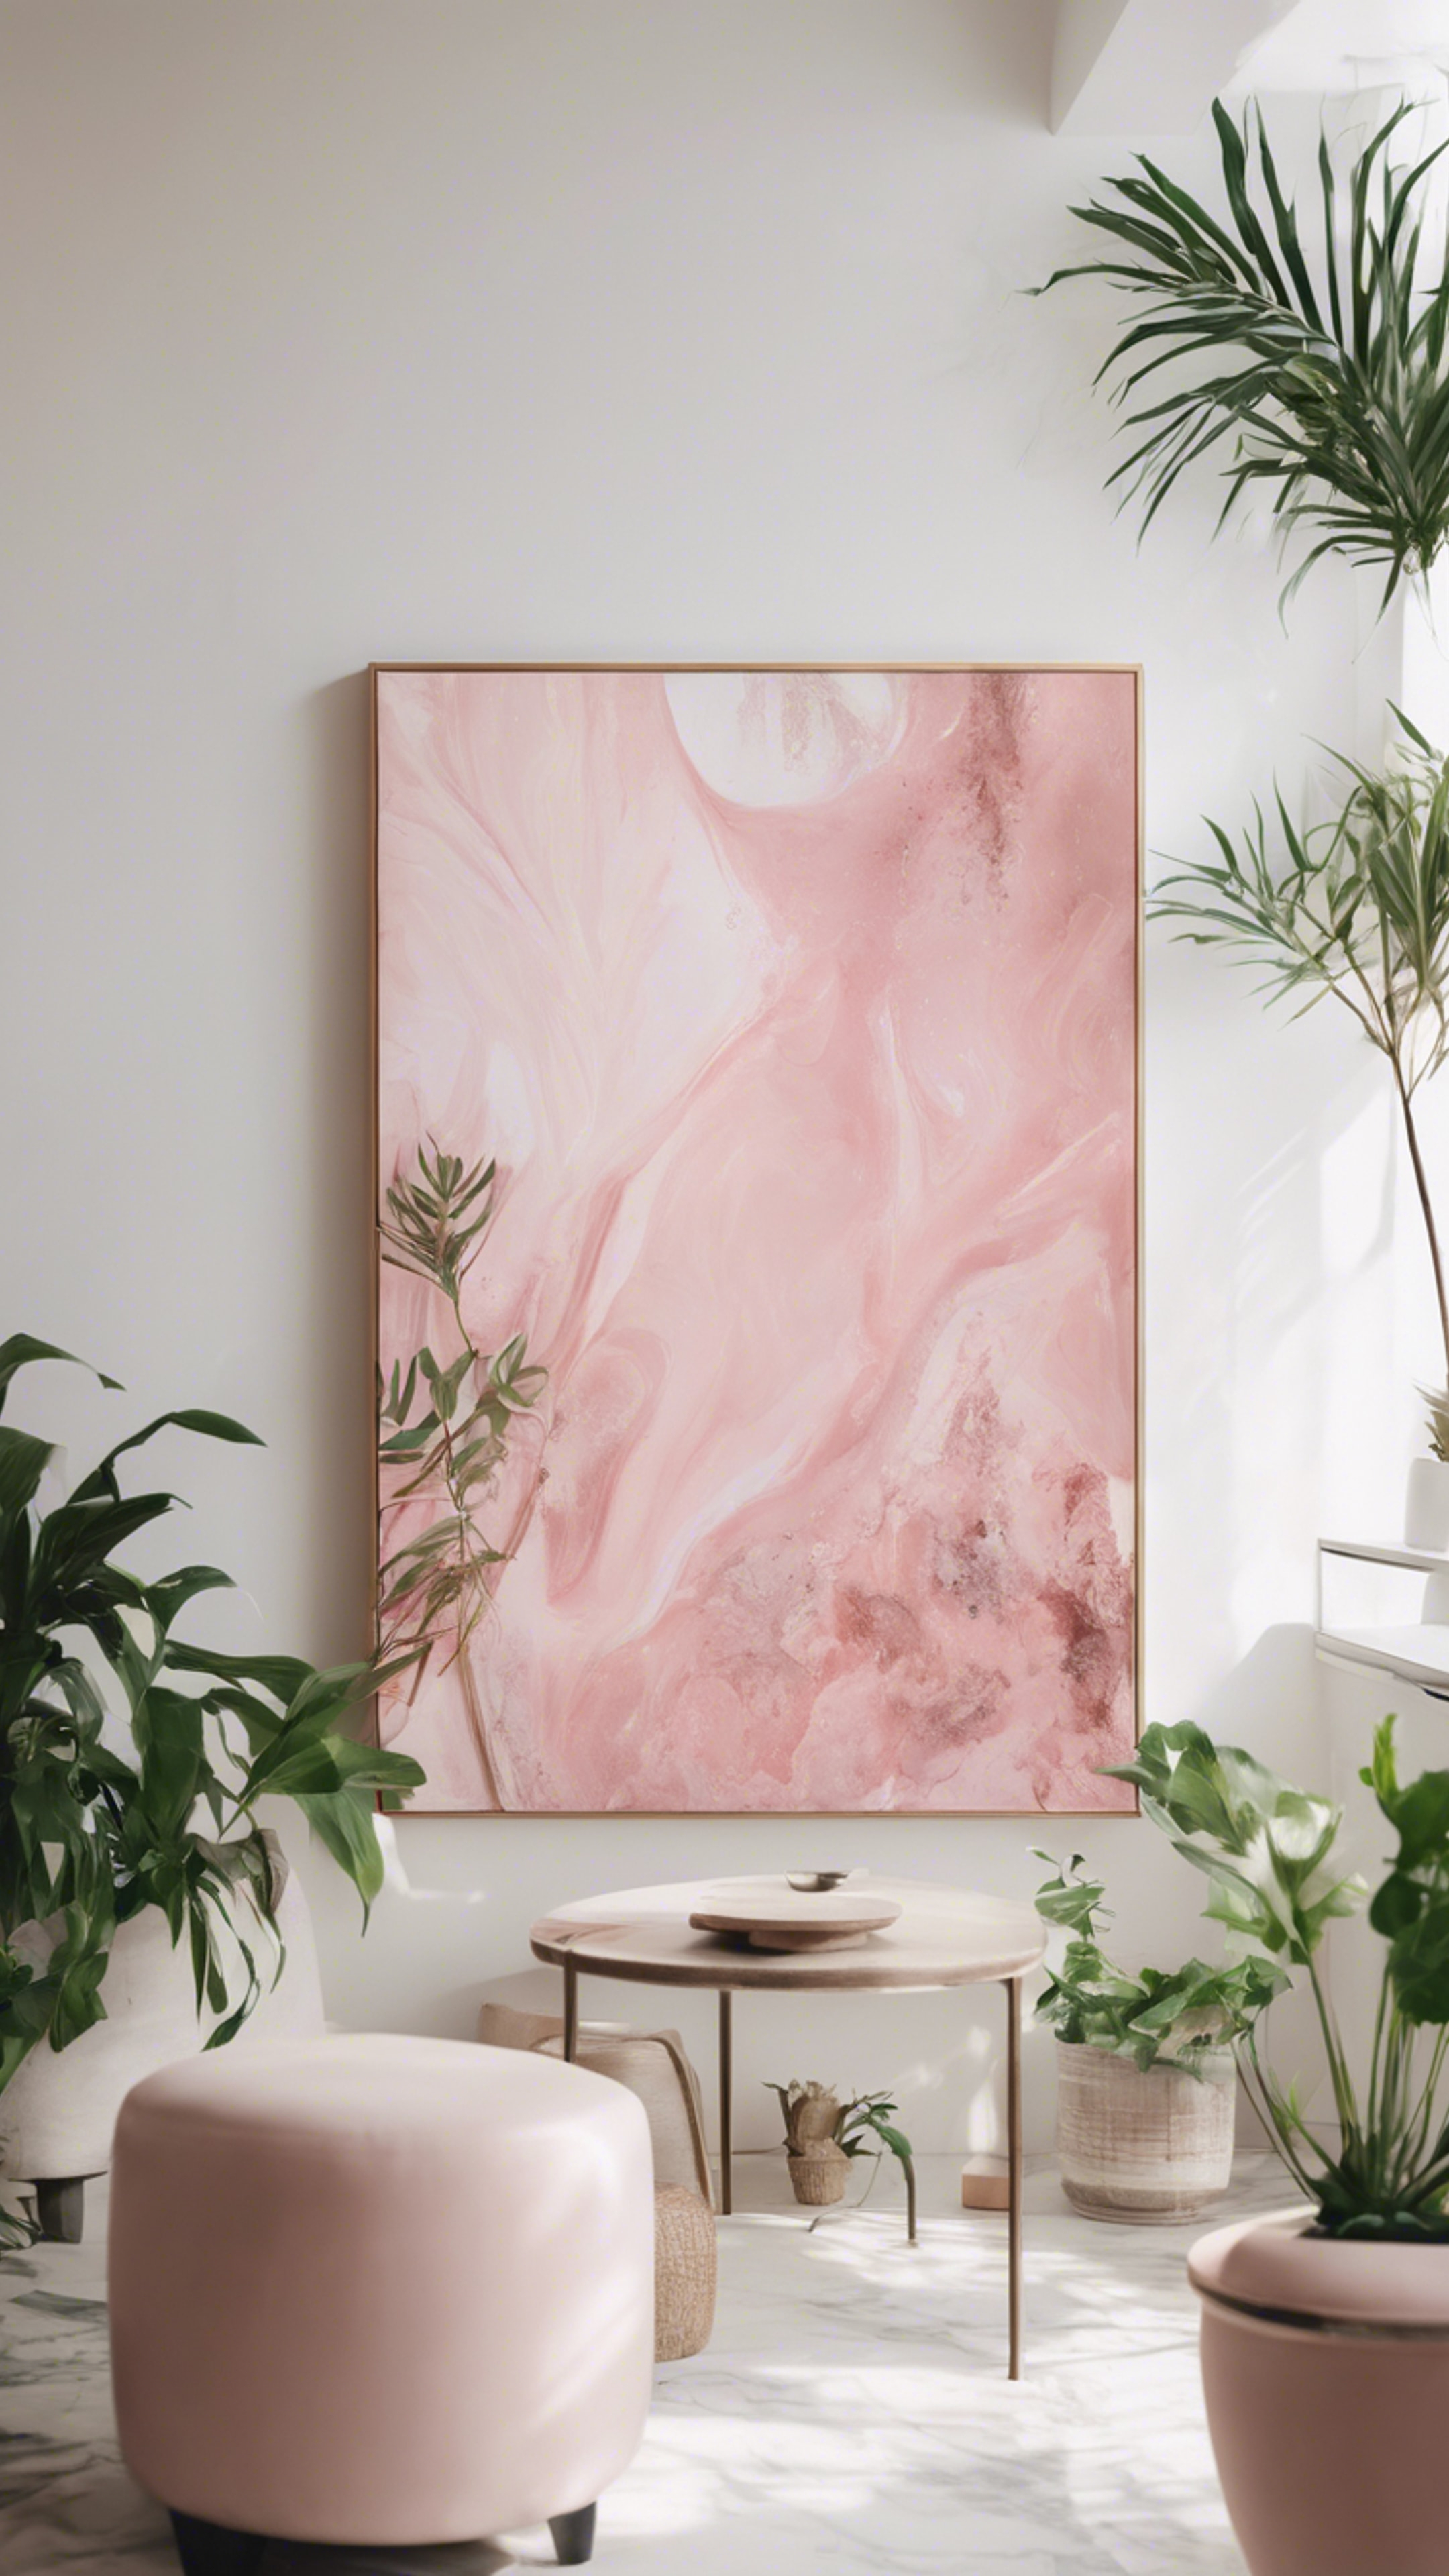 A soft pink abstract painting on a white wall surrounded by indoor plants, enhancing the aesthetic of the room Kertas dinding[9fa4f1f3650f4fbb9955]